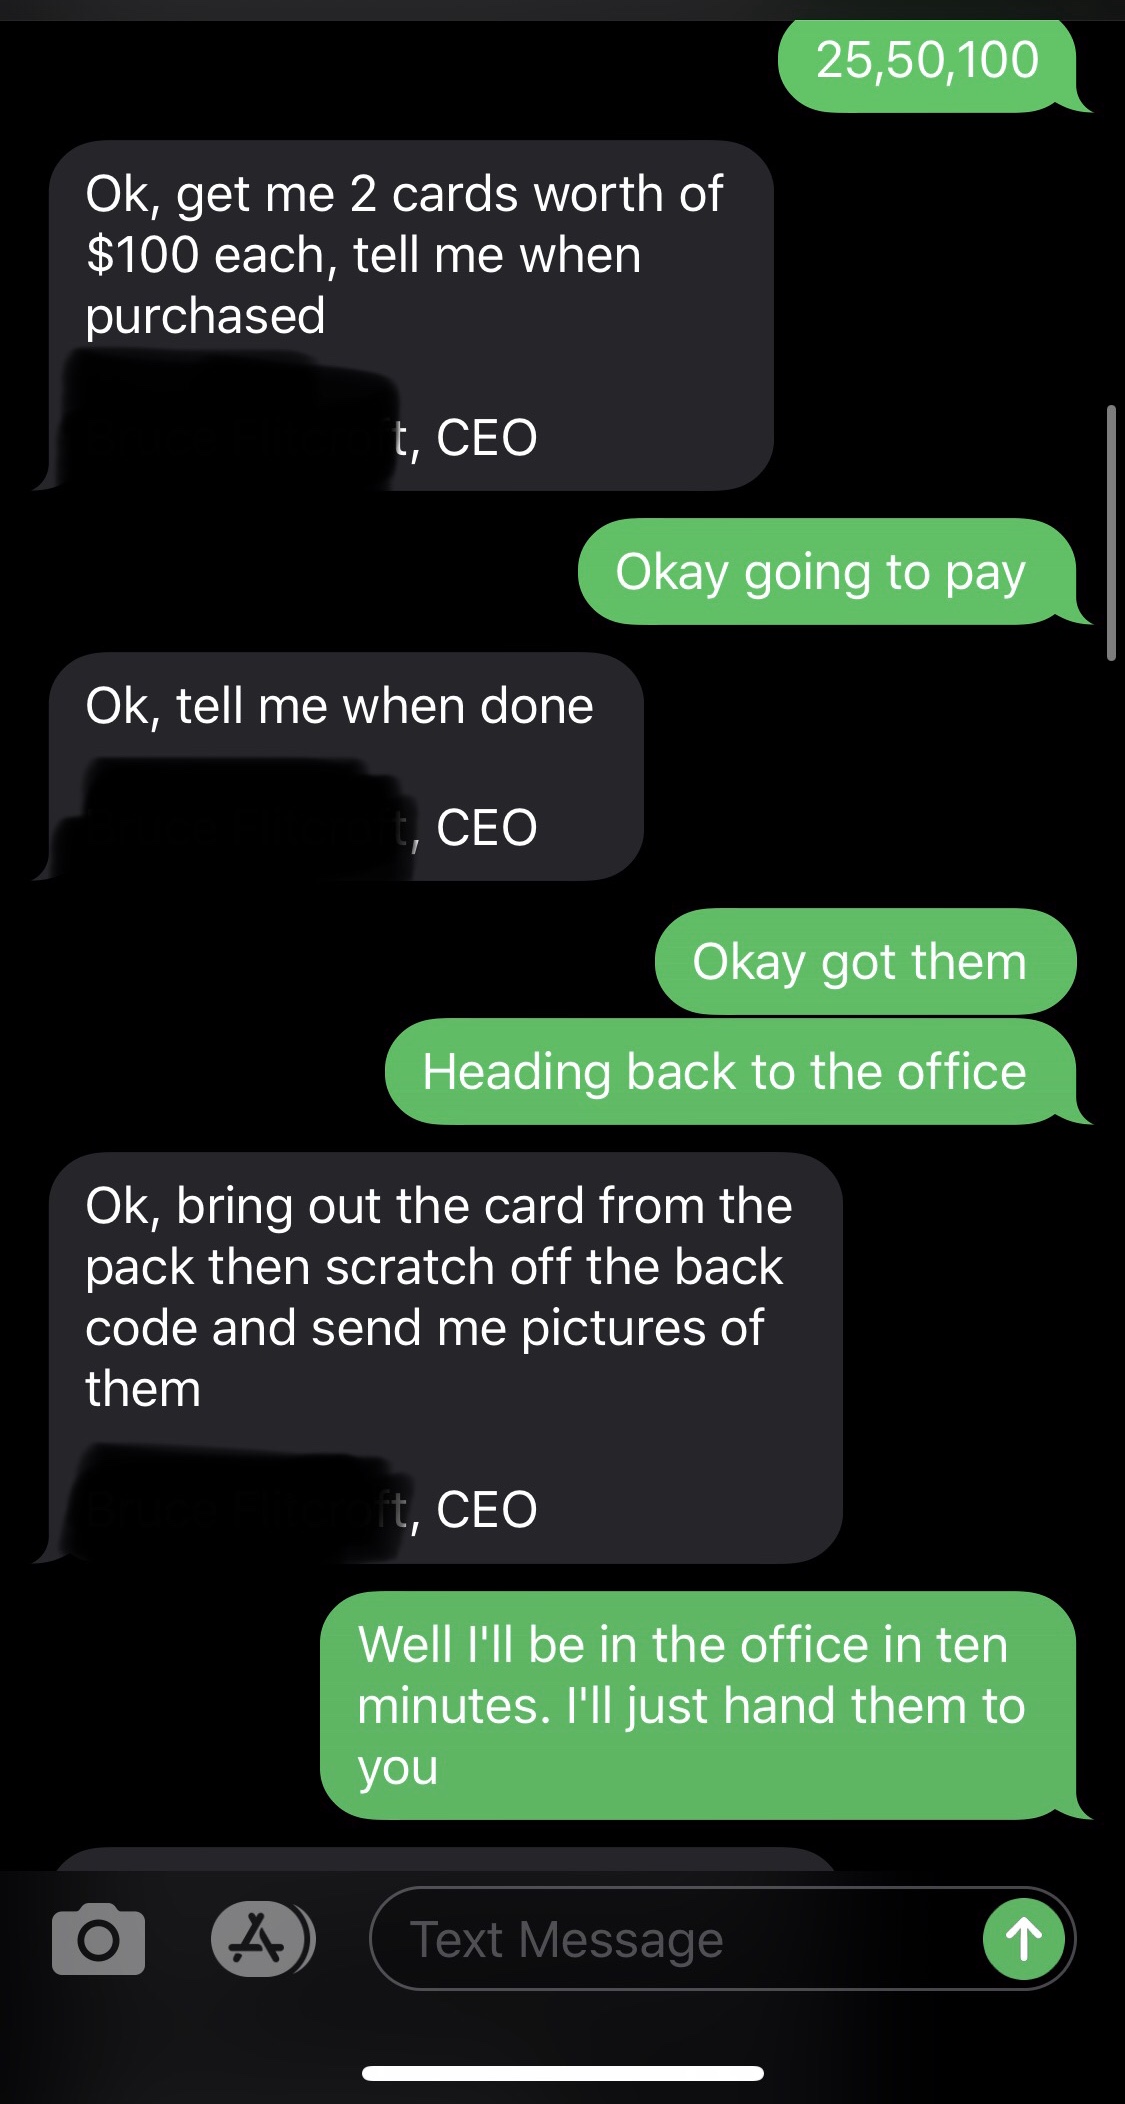 screenshot - 25,50,100 Ok, get me 2 cards worth of $100 each, tell me when purchased t, Ceo Okay going to pay Ok, tell me when done C, Ceo Okay got them Heading back to the office Ok, bring out the card from the pack then scratch off the back code and sen